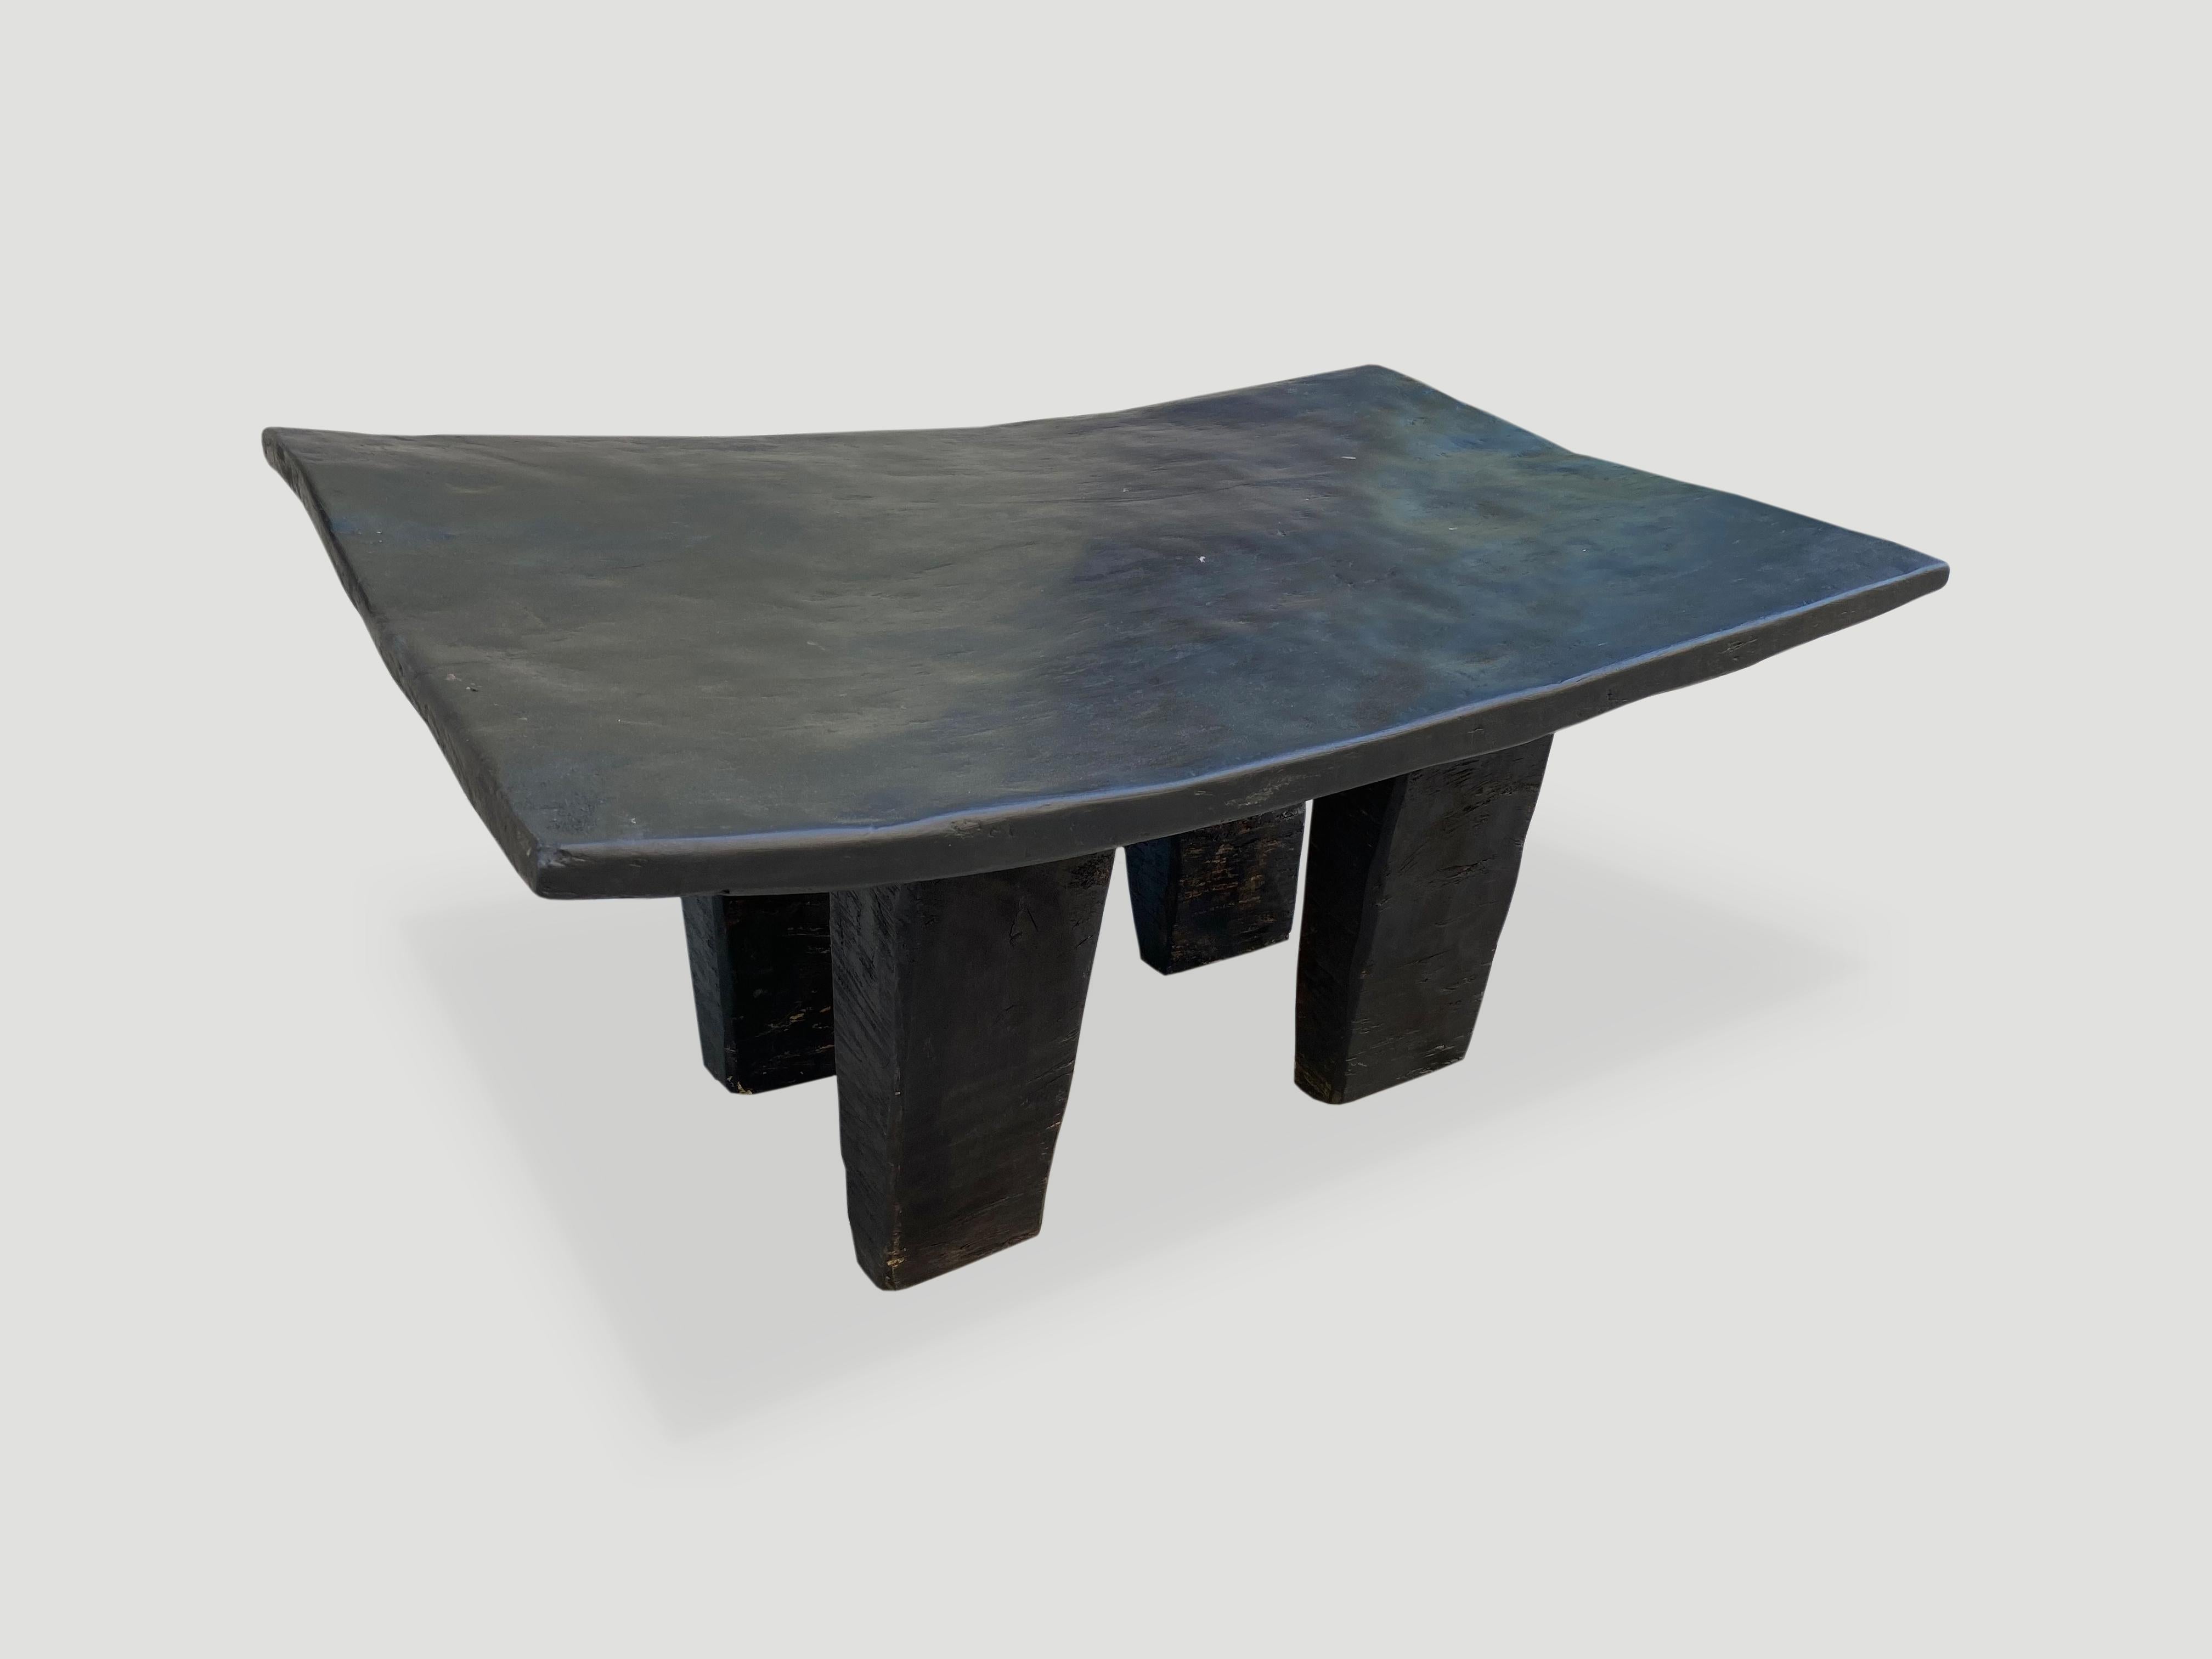 Antique coffee table hand carved by the Senufo tribes from a single block of iroko wood, native to the west coast of Africa. The wood is tough, dense and very durable. We stained the wood espresso. Shown with unusual rectangular style legs. We only